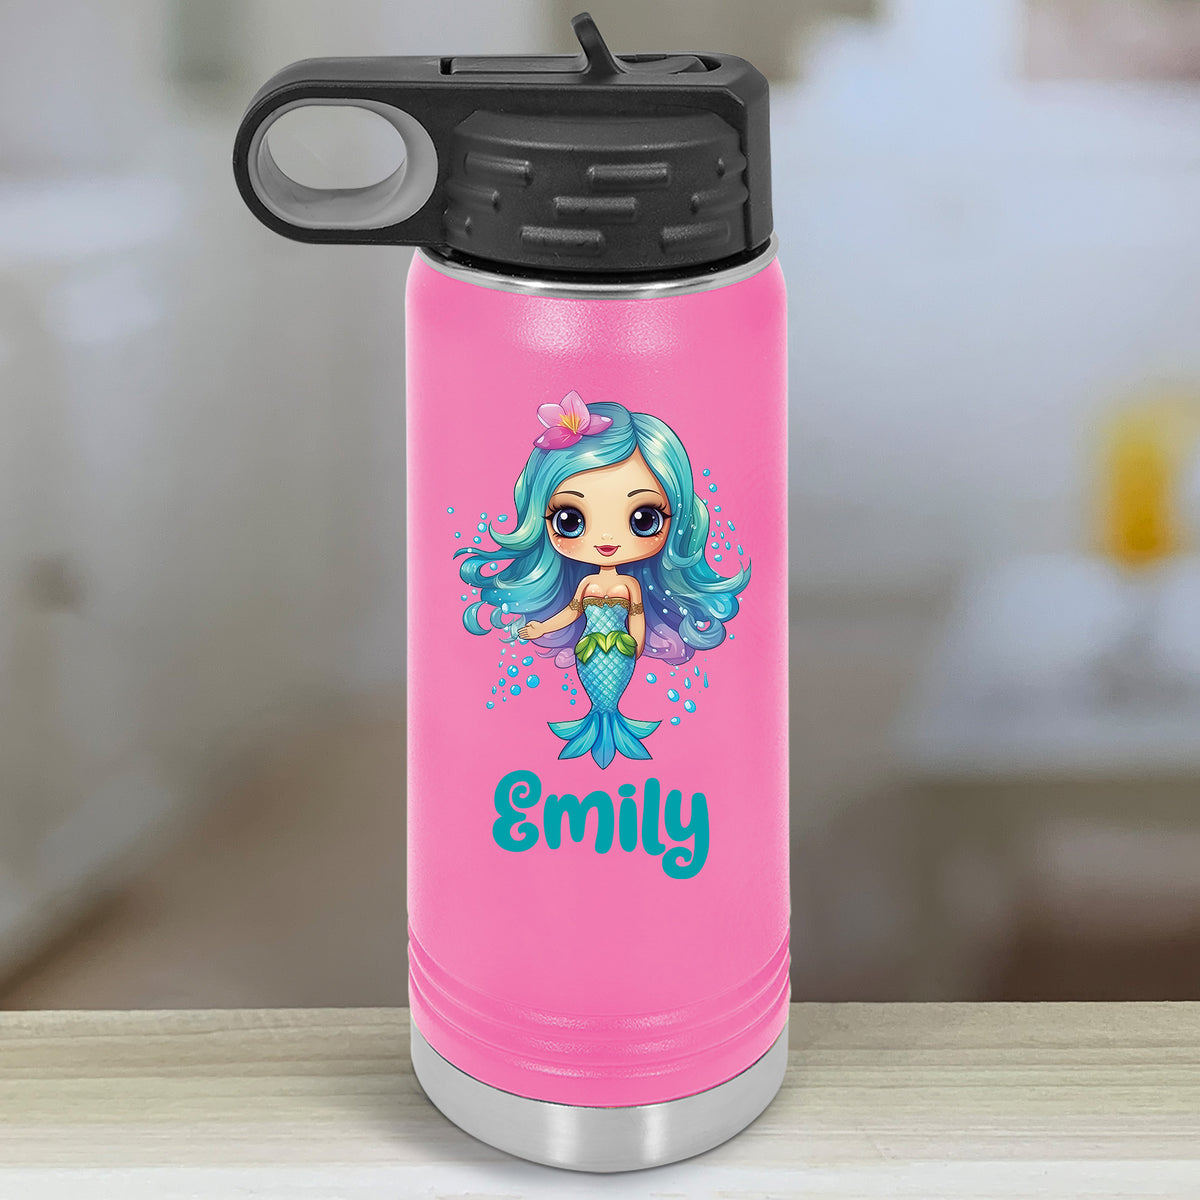 Adventure PET Water Bottle with Drinking Spout - 32 Oz. - Personalization  Available